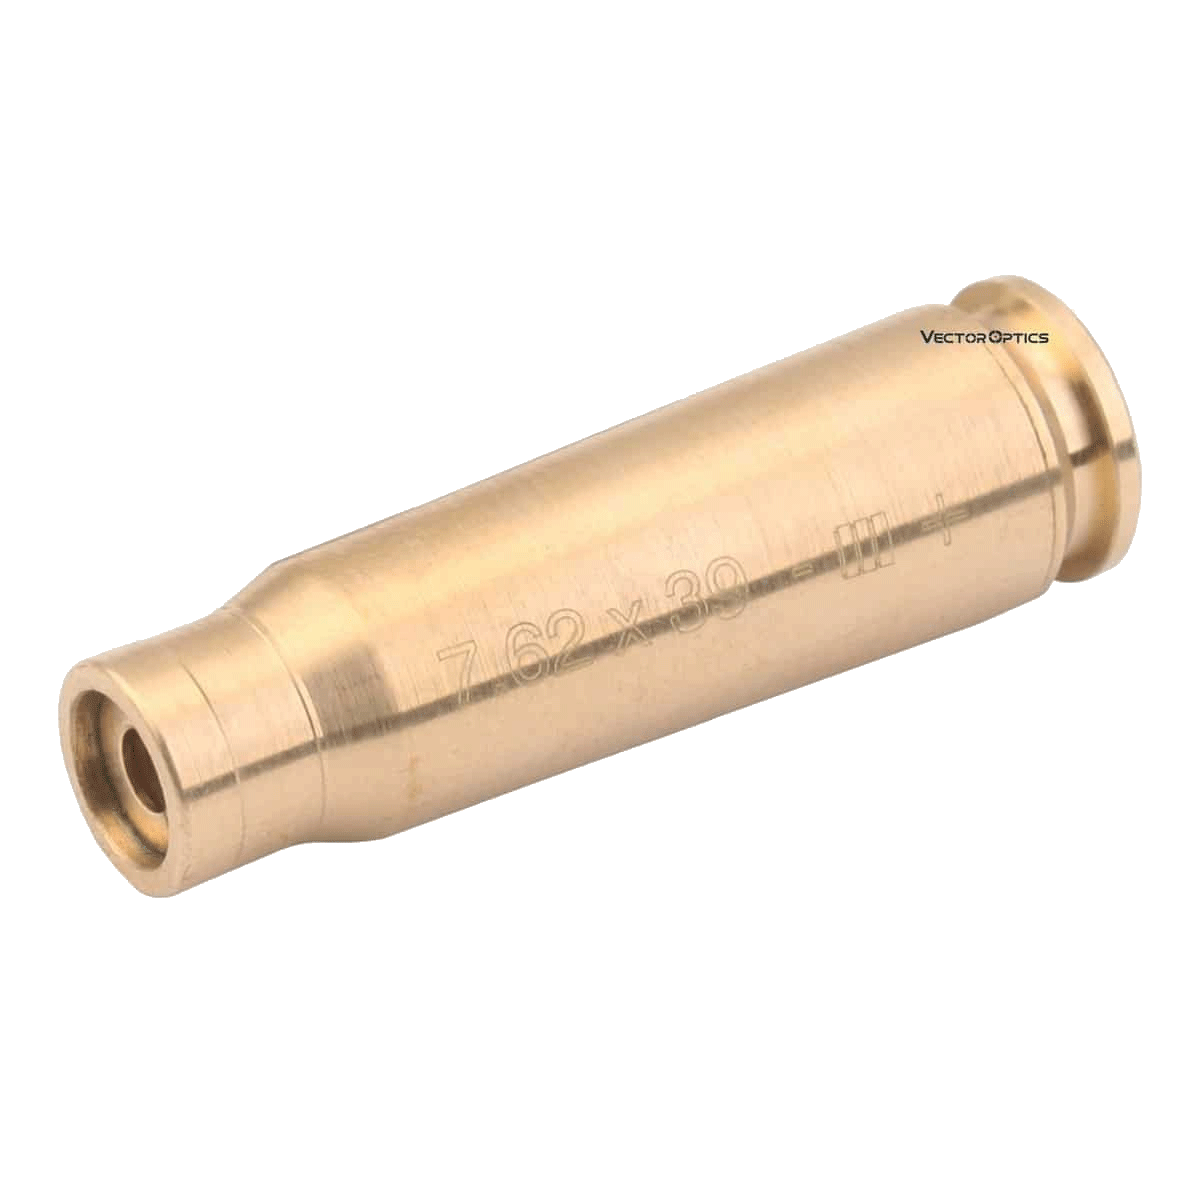 7.62x39mm Cartridge Red Laser Bore Sight